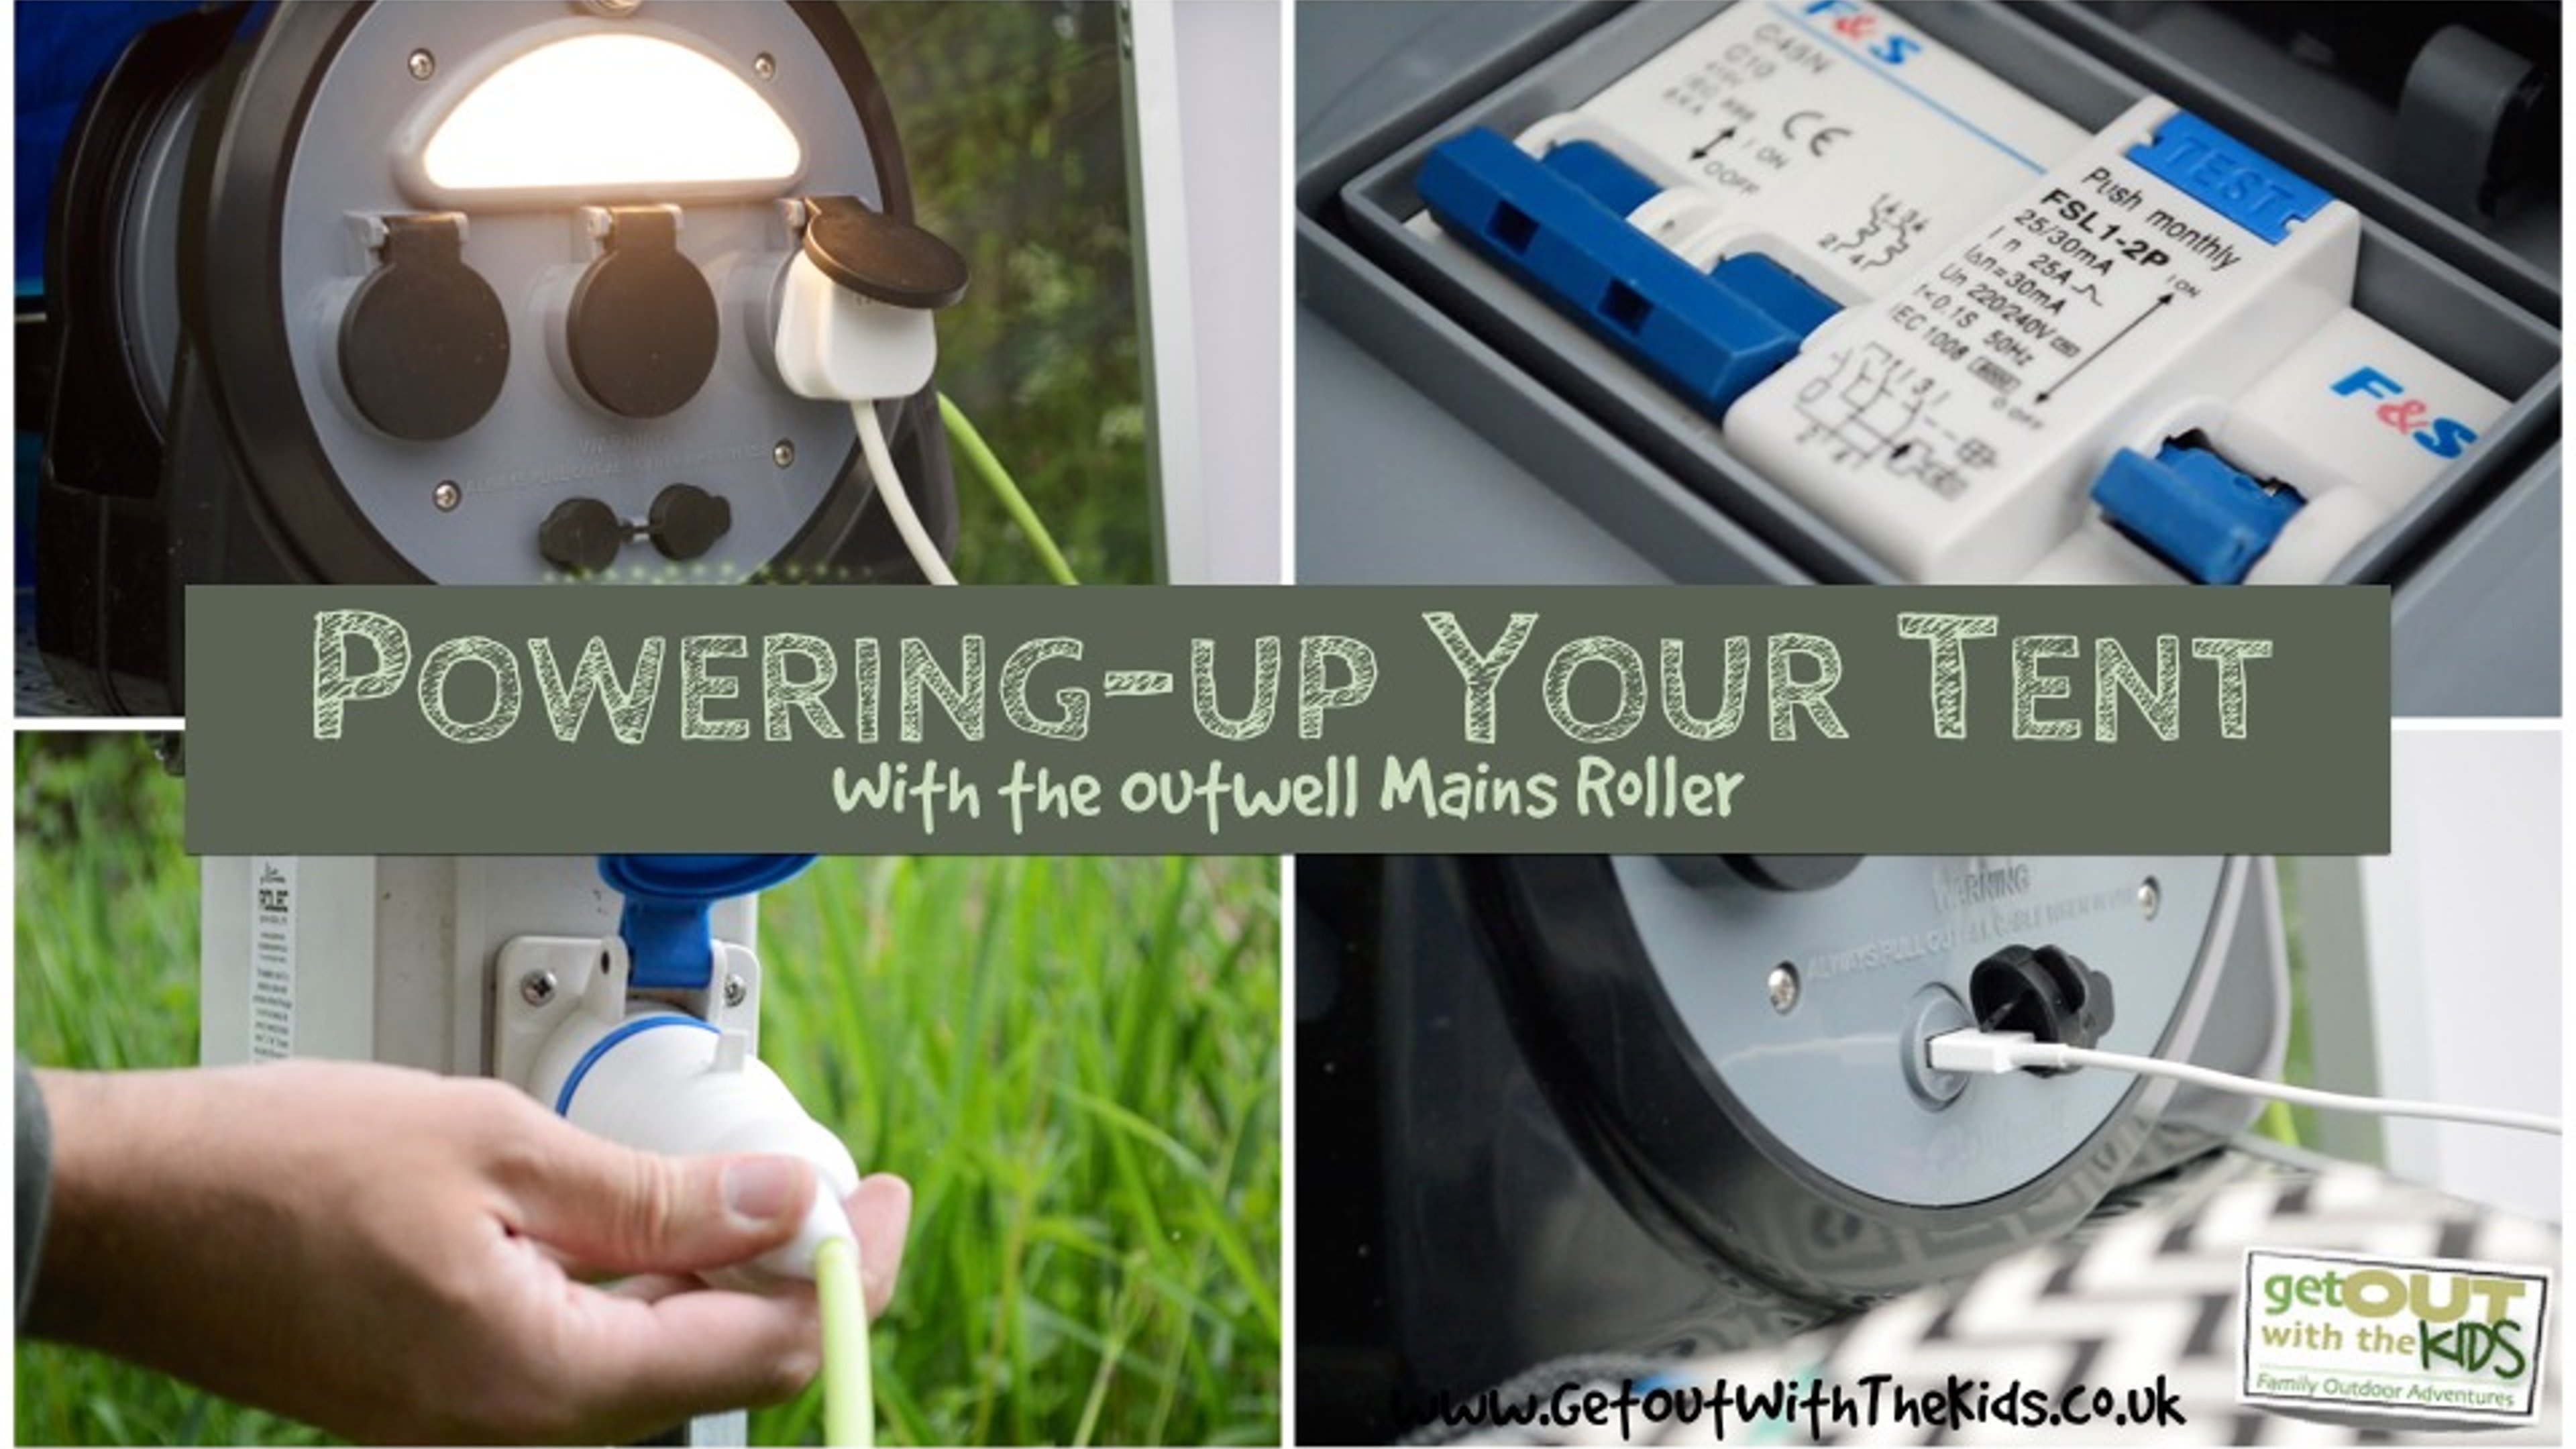 Powering up your tent